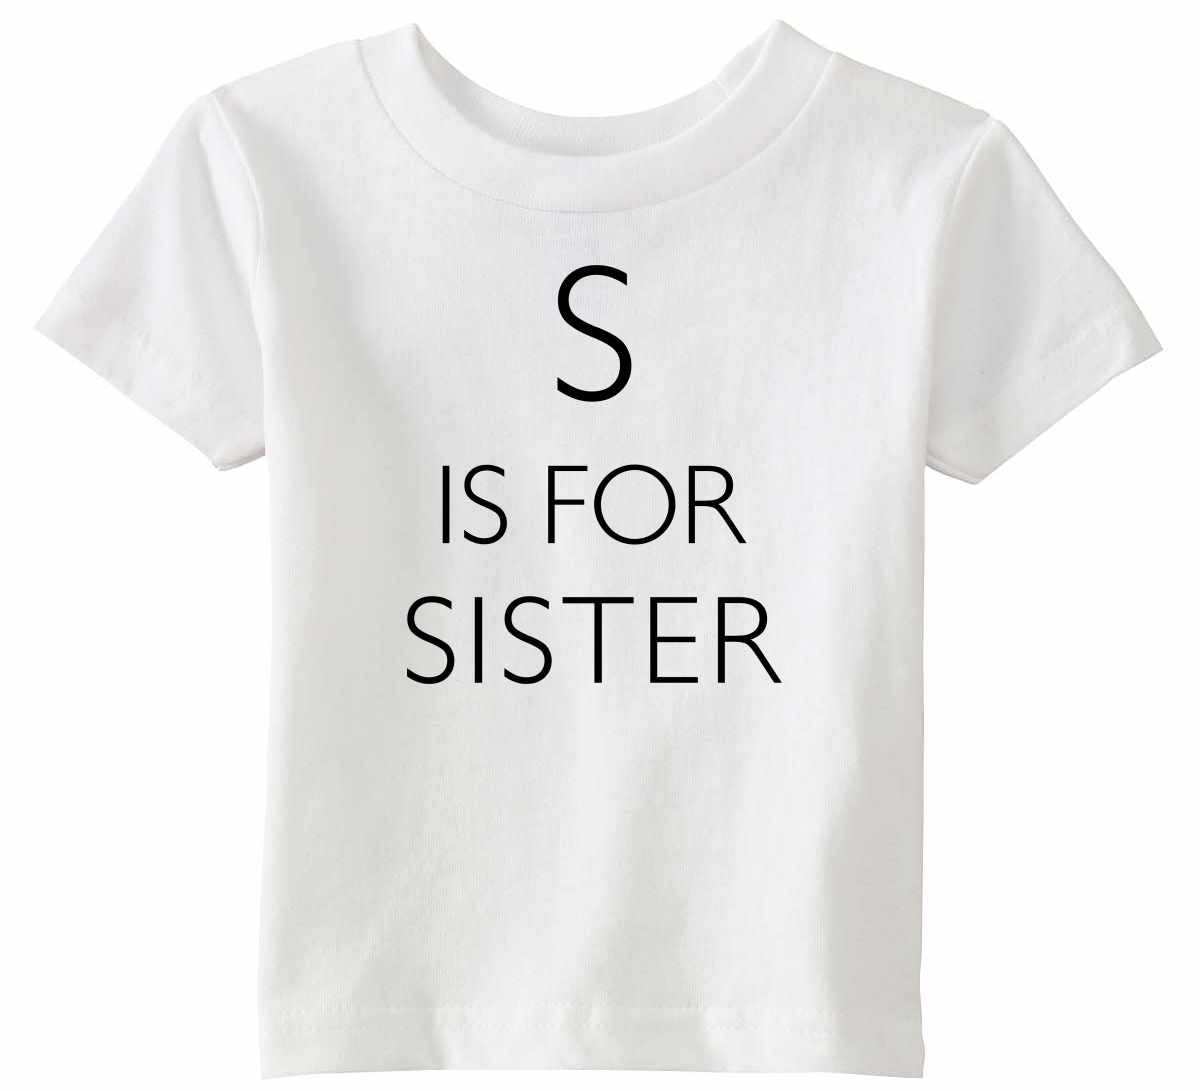 S is for Sister Infant/Toddler  (#1159-7)